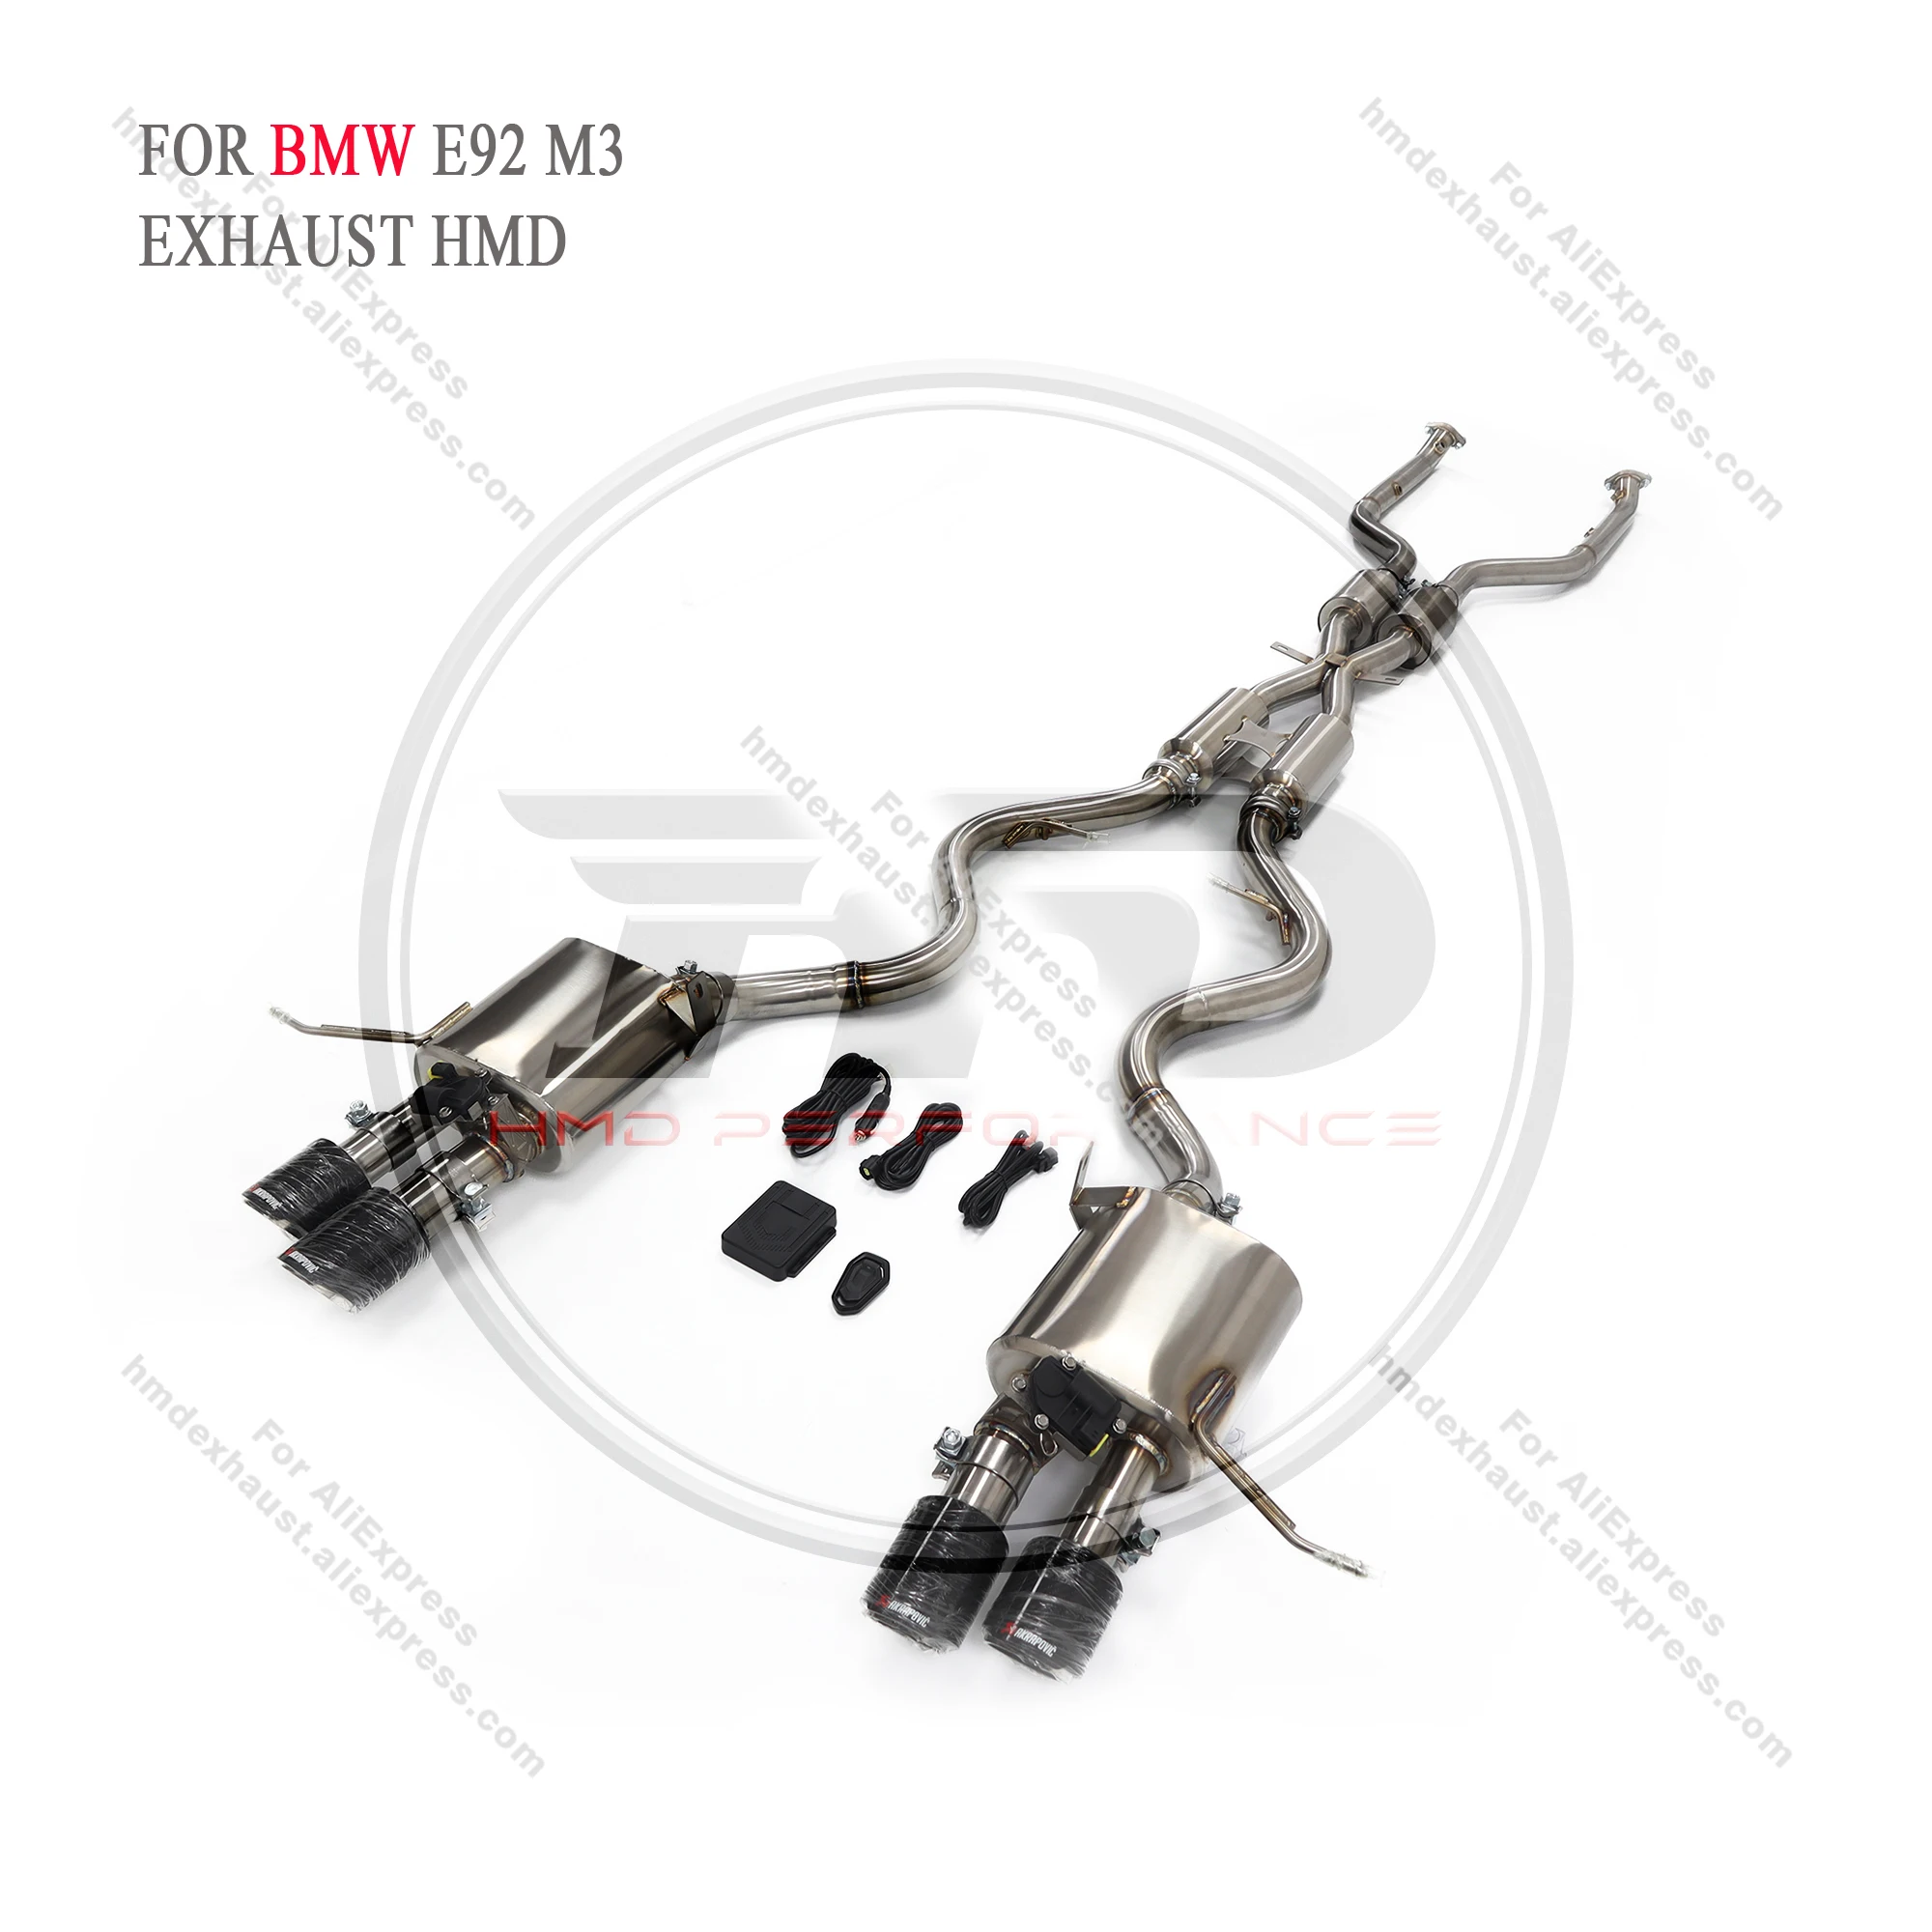 

HMD Exhaust System Stainless Steel Performance Catback for BMW E92 M3 4.0L Muffler With Valve